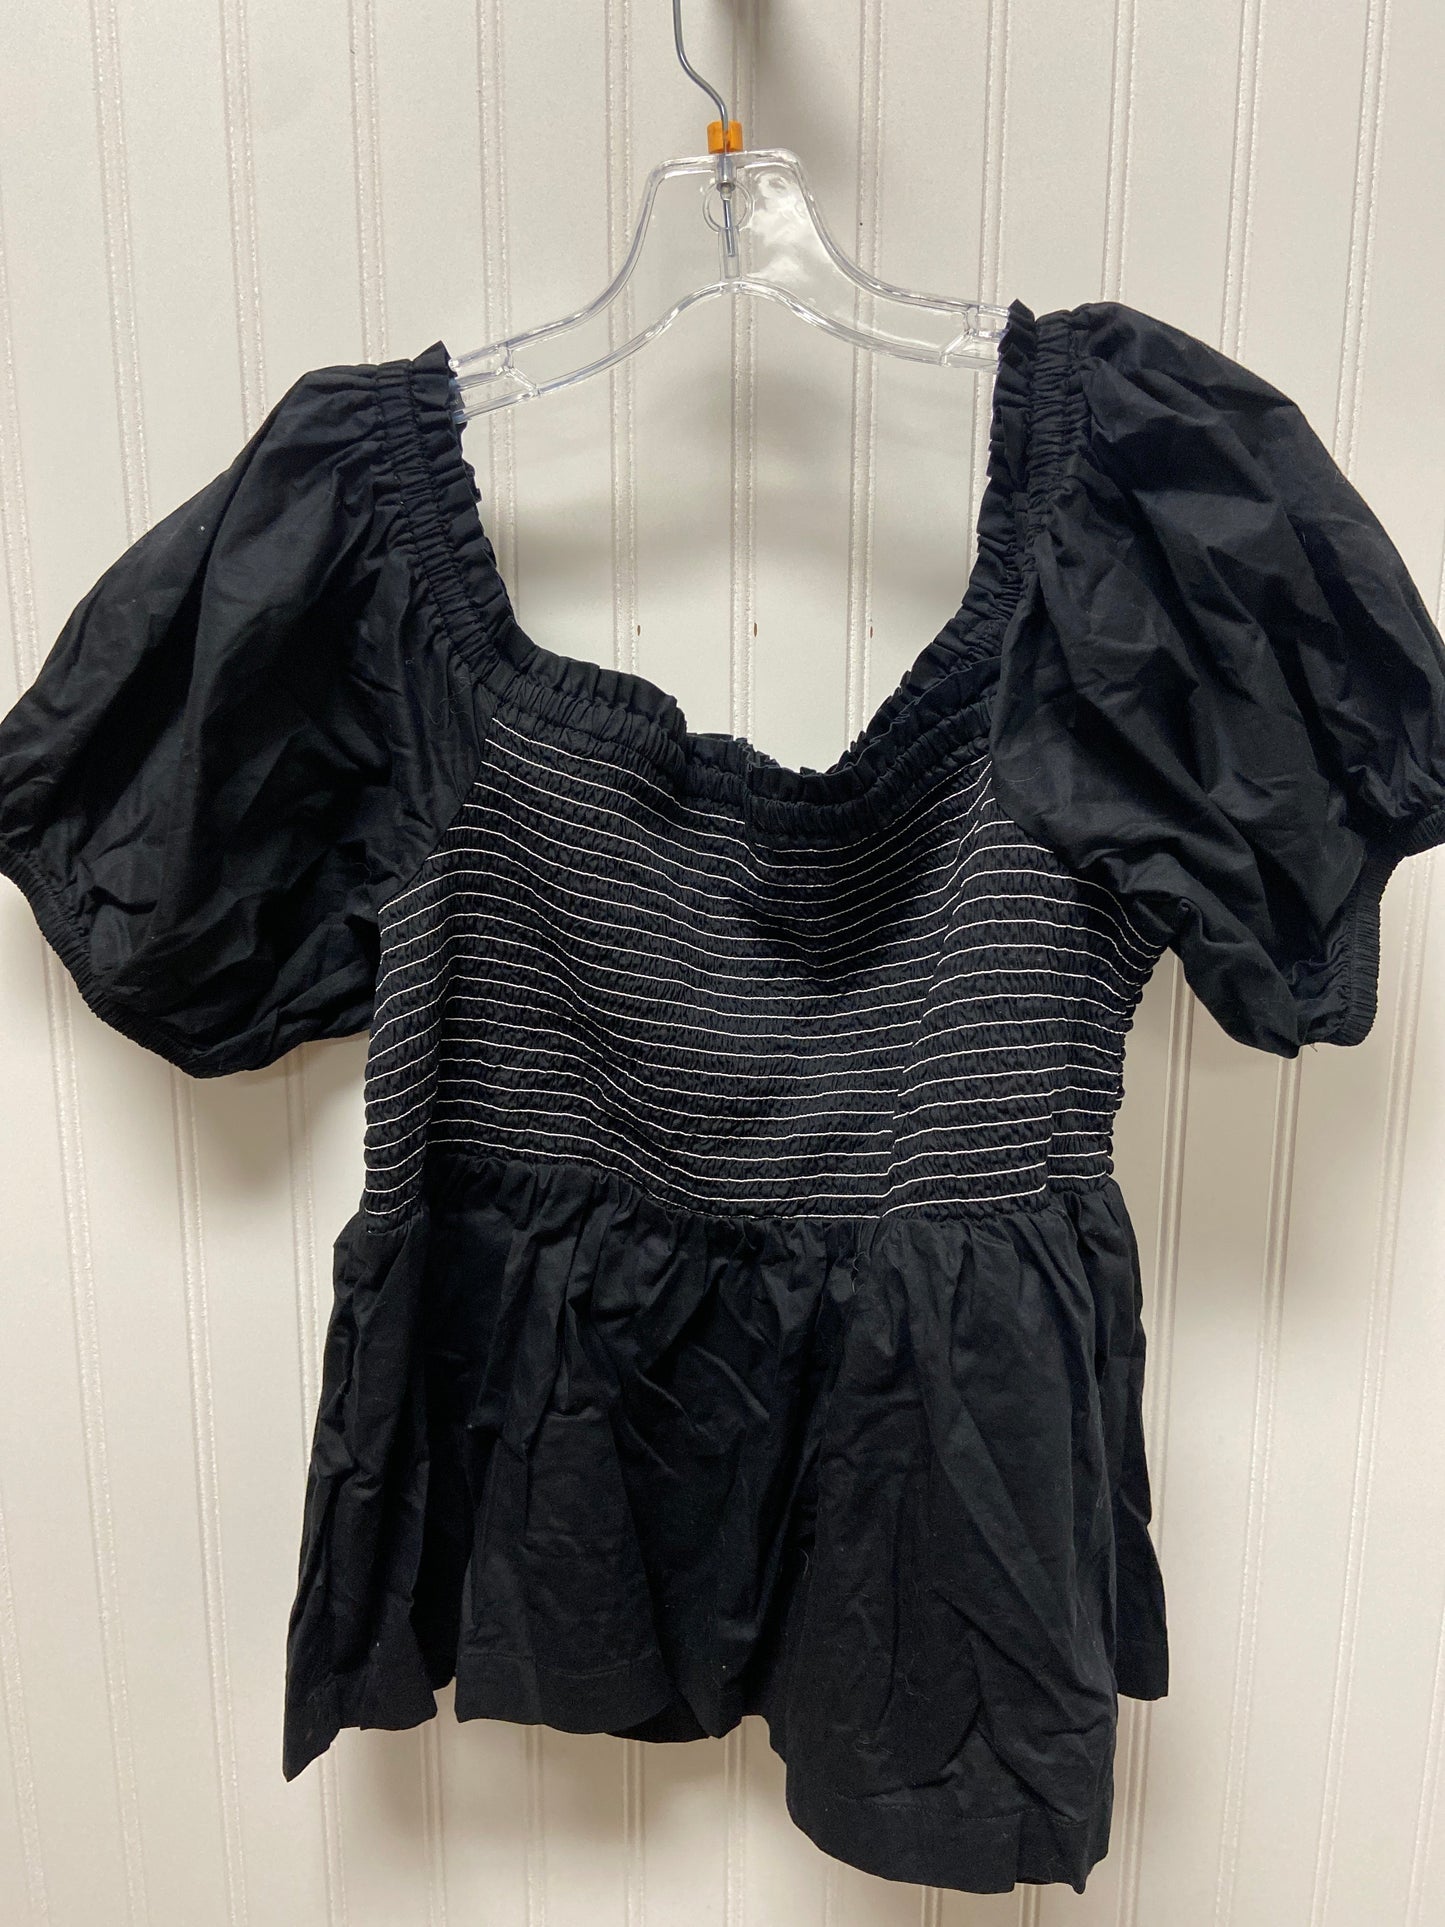 Top Short Sleeve By Old Navy  Size: 1x